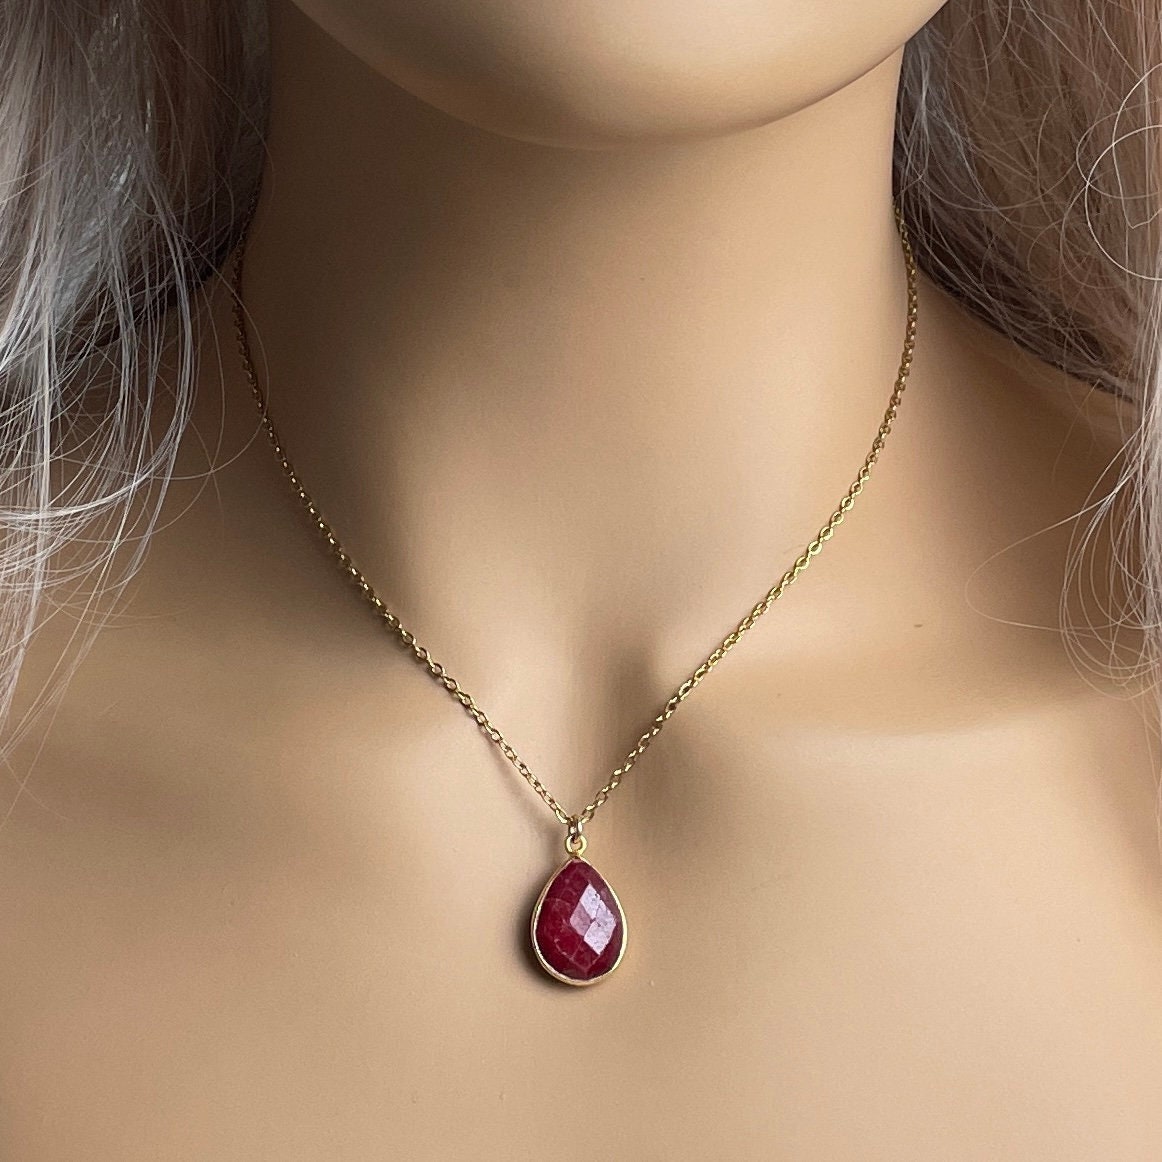 Raw Ruby Necklace, Small Ruby Crystal Pendant, Sterling Silver or 14kt Gold  Filled – GEMNIA